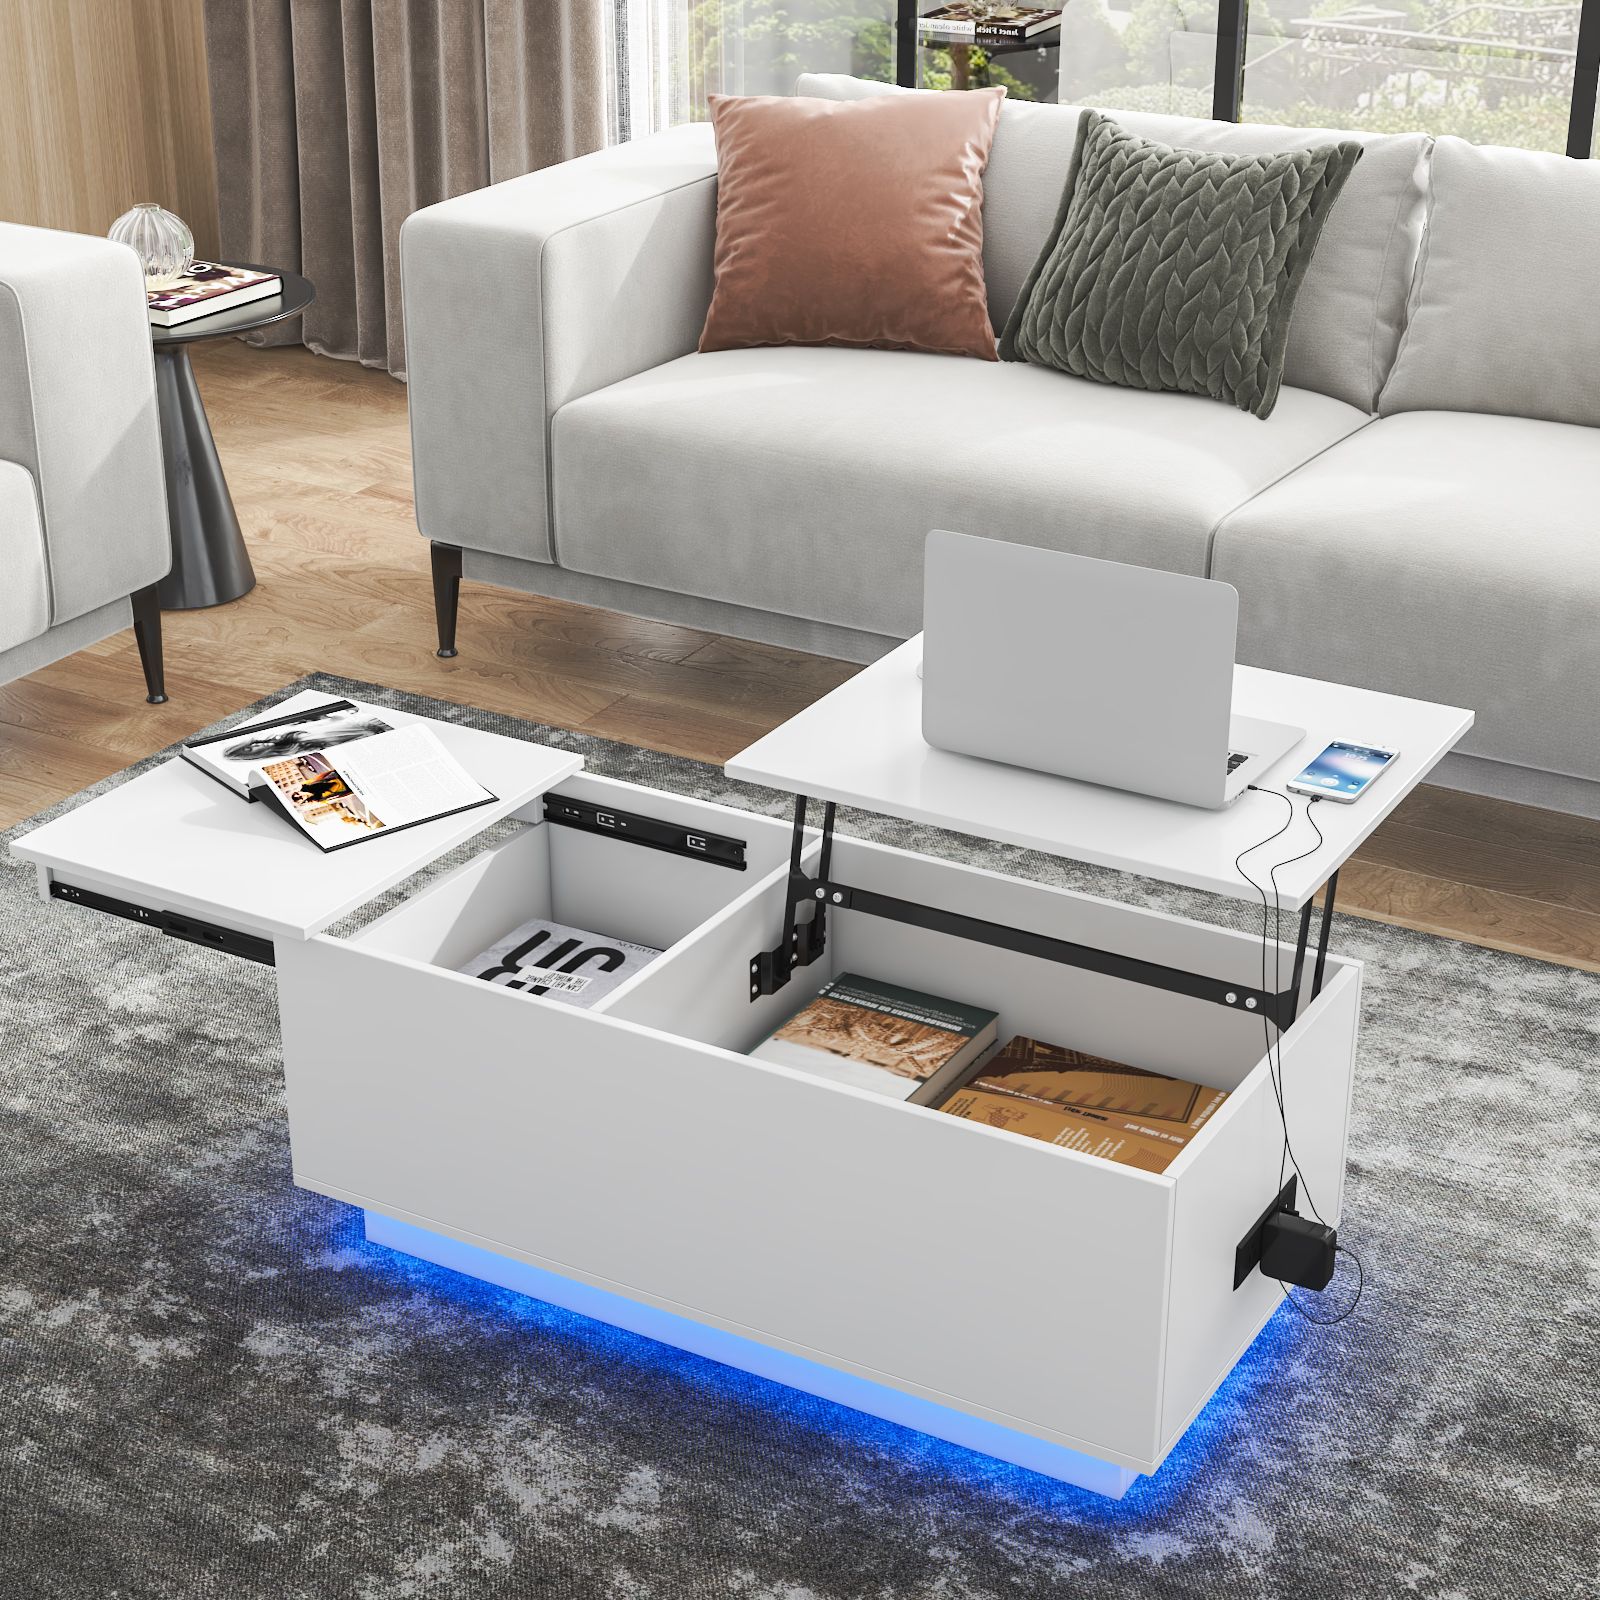 Hommpa Led Lift Top Coffee Table With Charging Station For Living Room,  Gray Hidden Storage Rising Dining Table – Walmart For Coffee Tables With Charging Station (View 20 of 20)